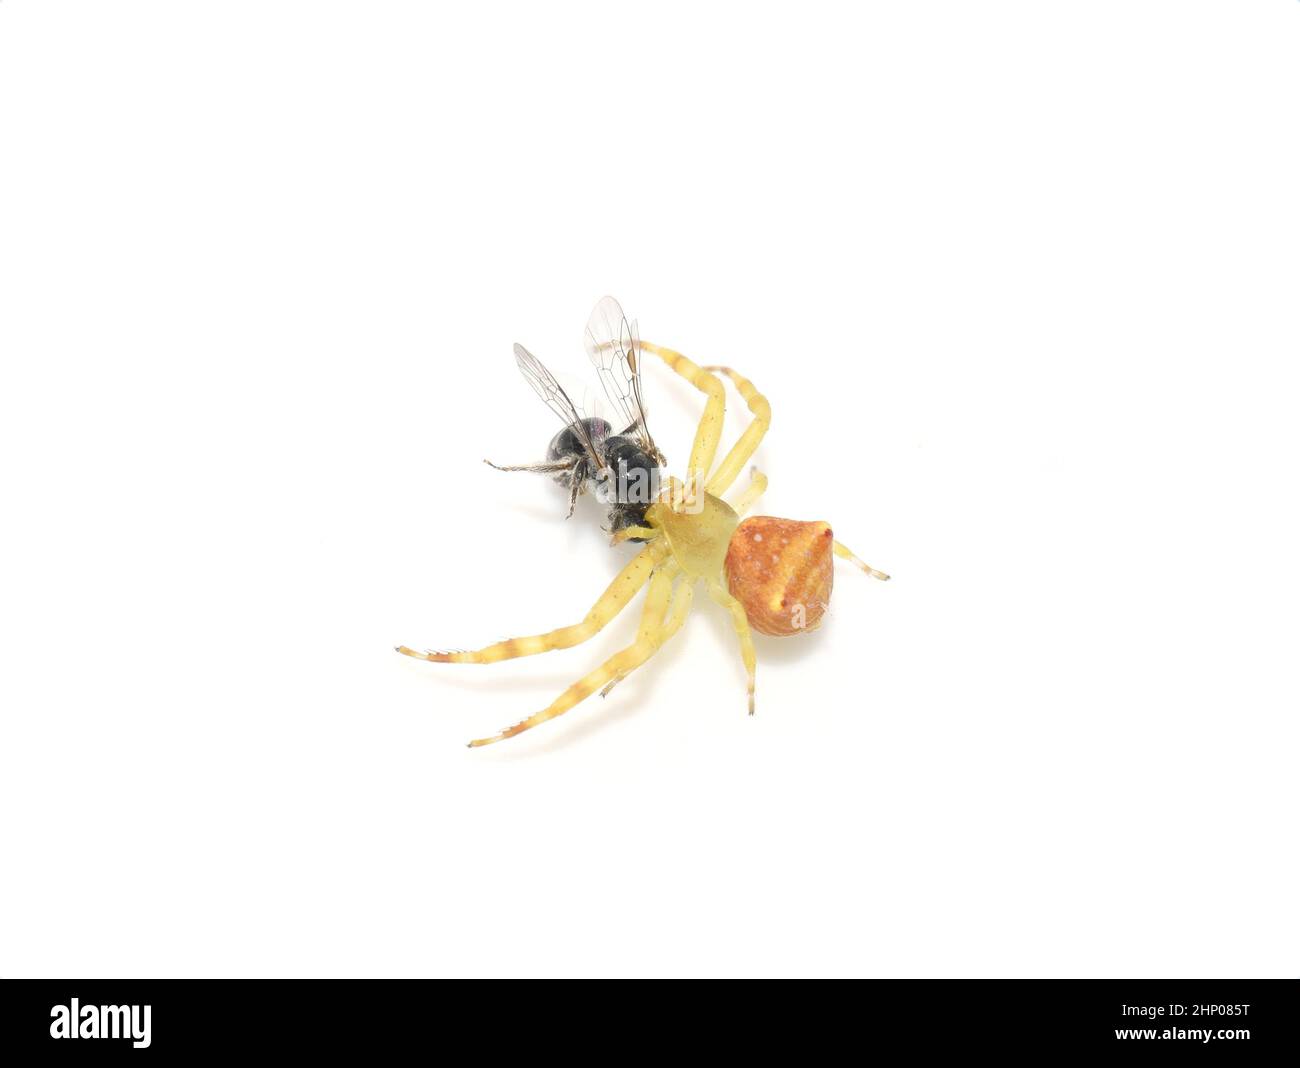 Thomisidae crab spider with small bee prey isolated on white background Stock Photo